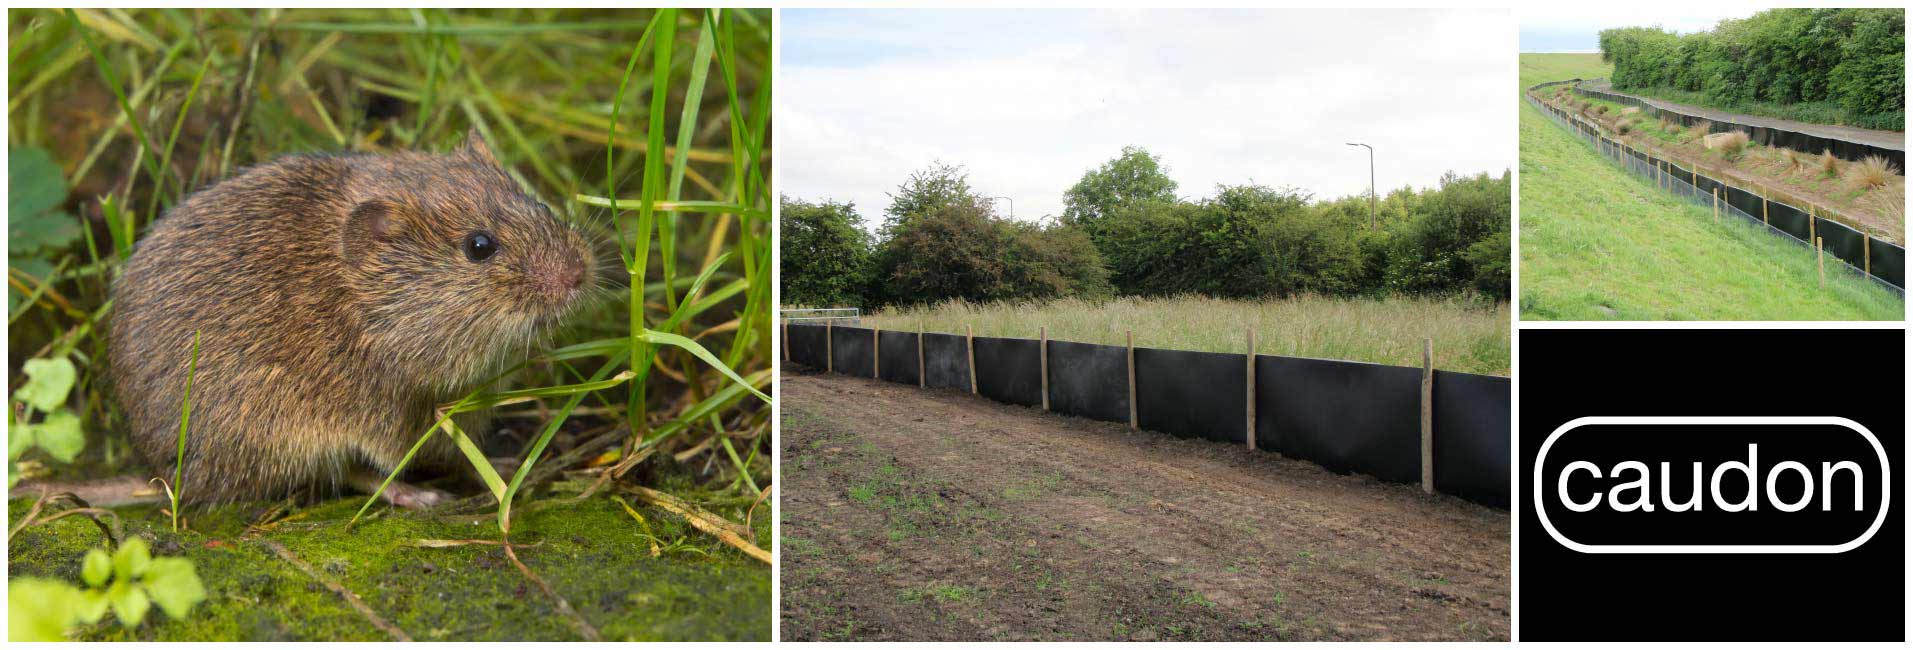 Caudon Fencing Systems